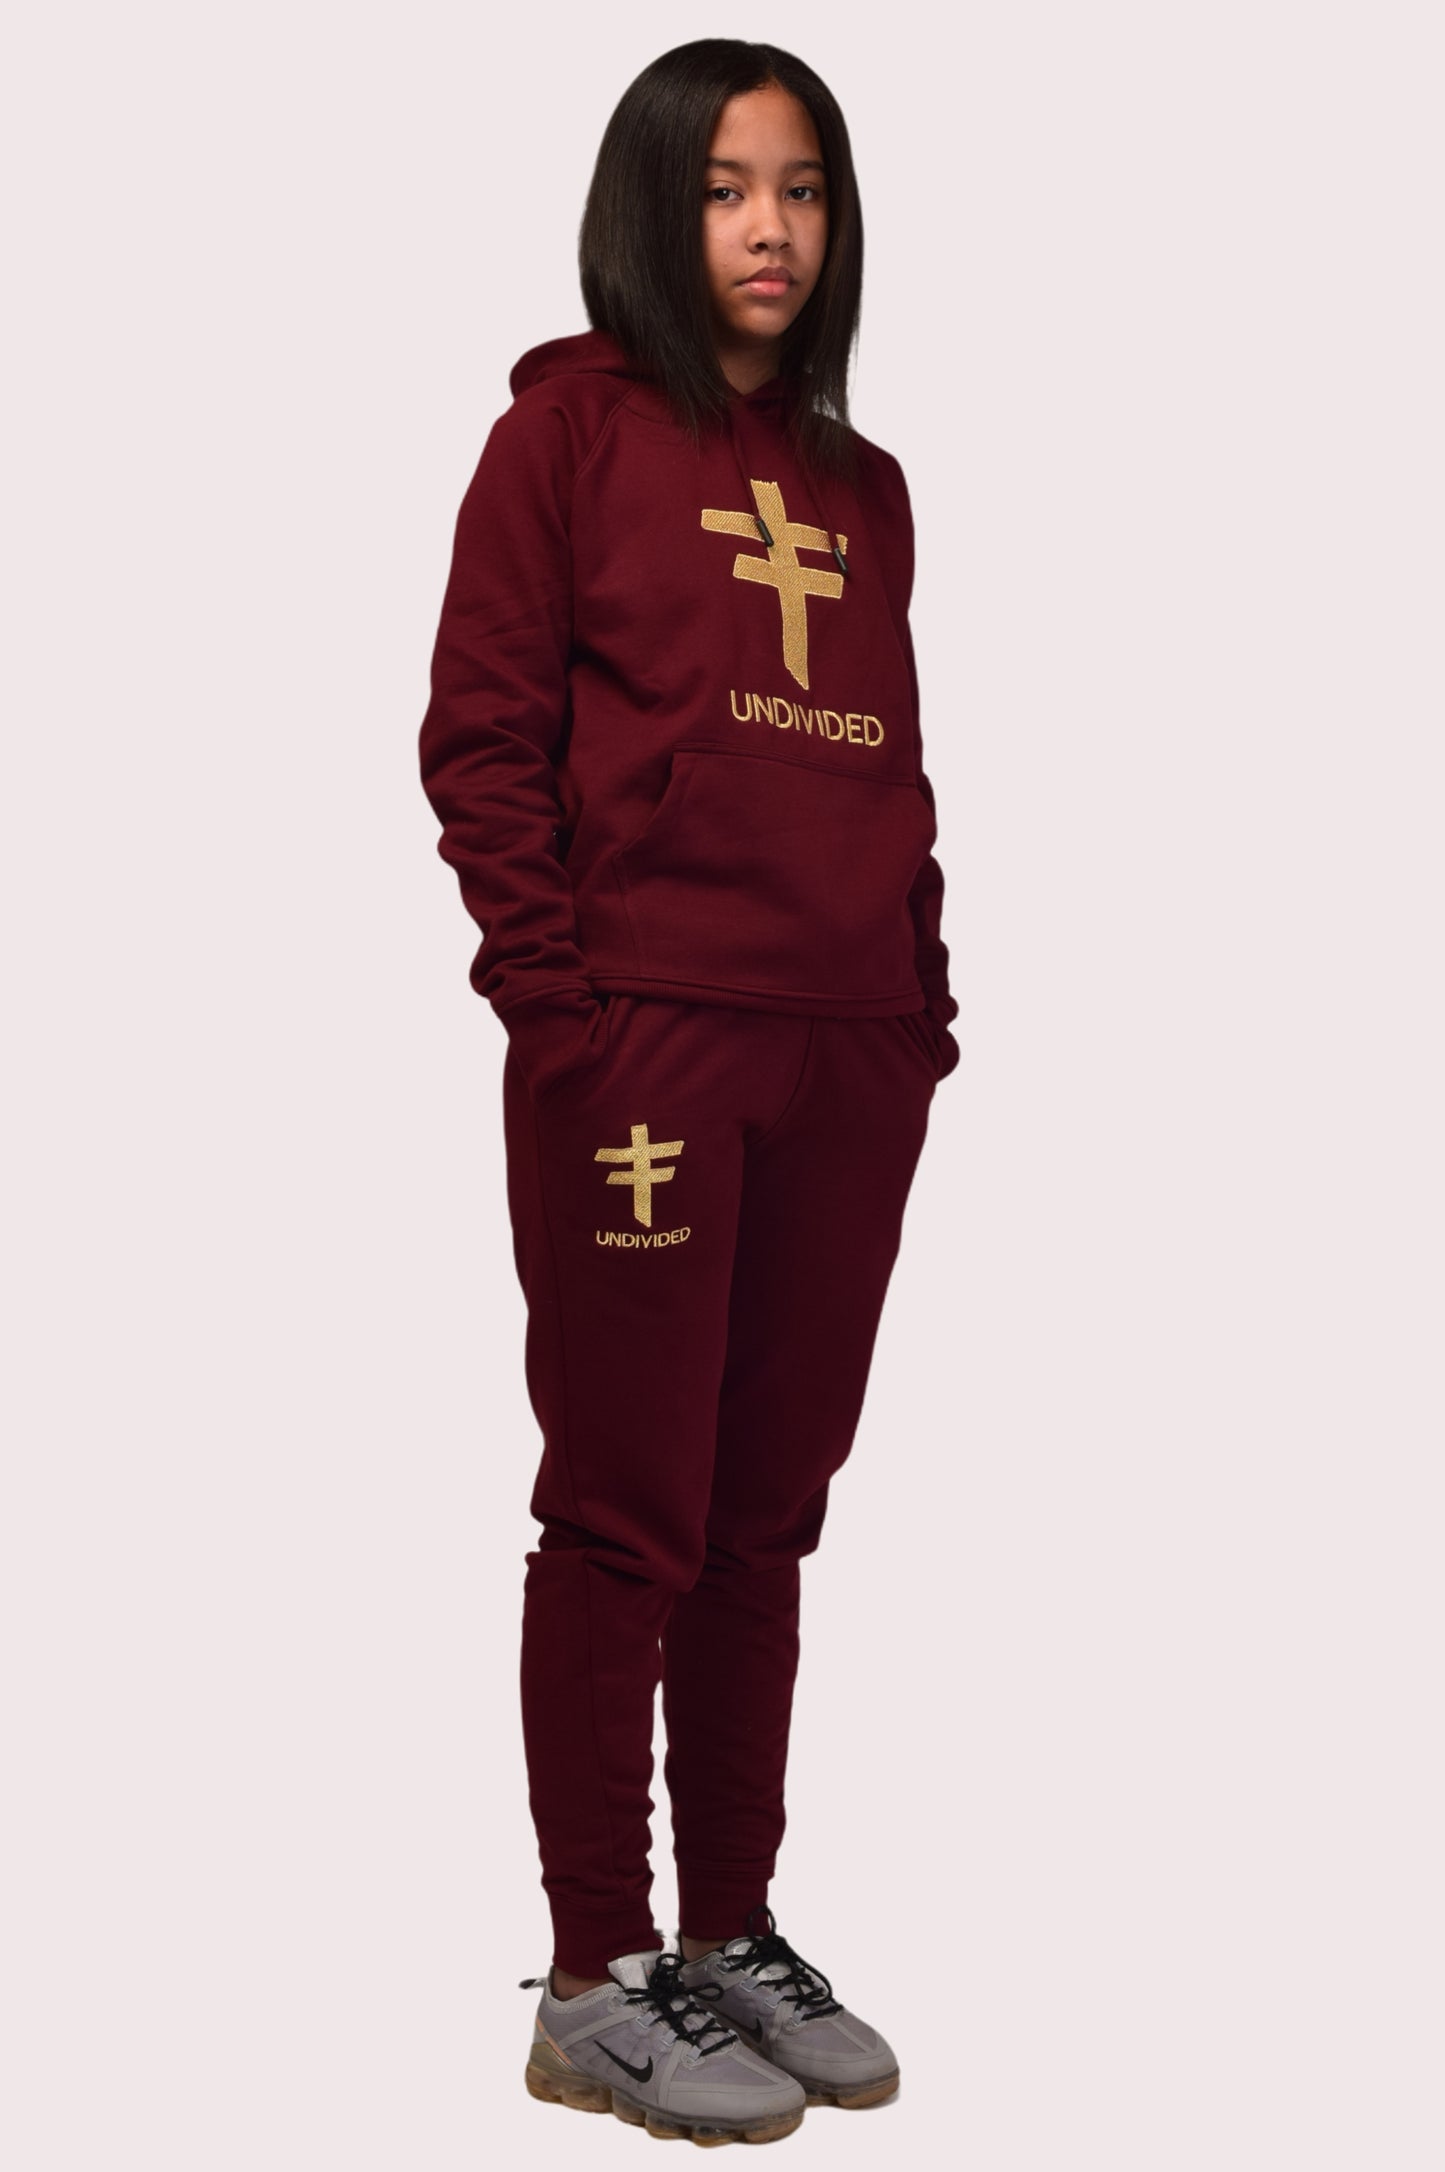 Undivided- Burgundy Tracksuit Gold Embroidery (Girls / Ladies)